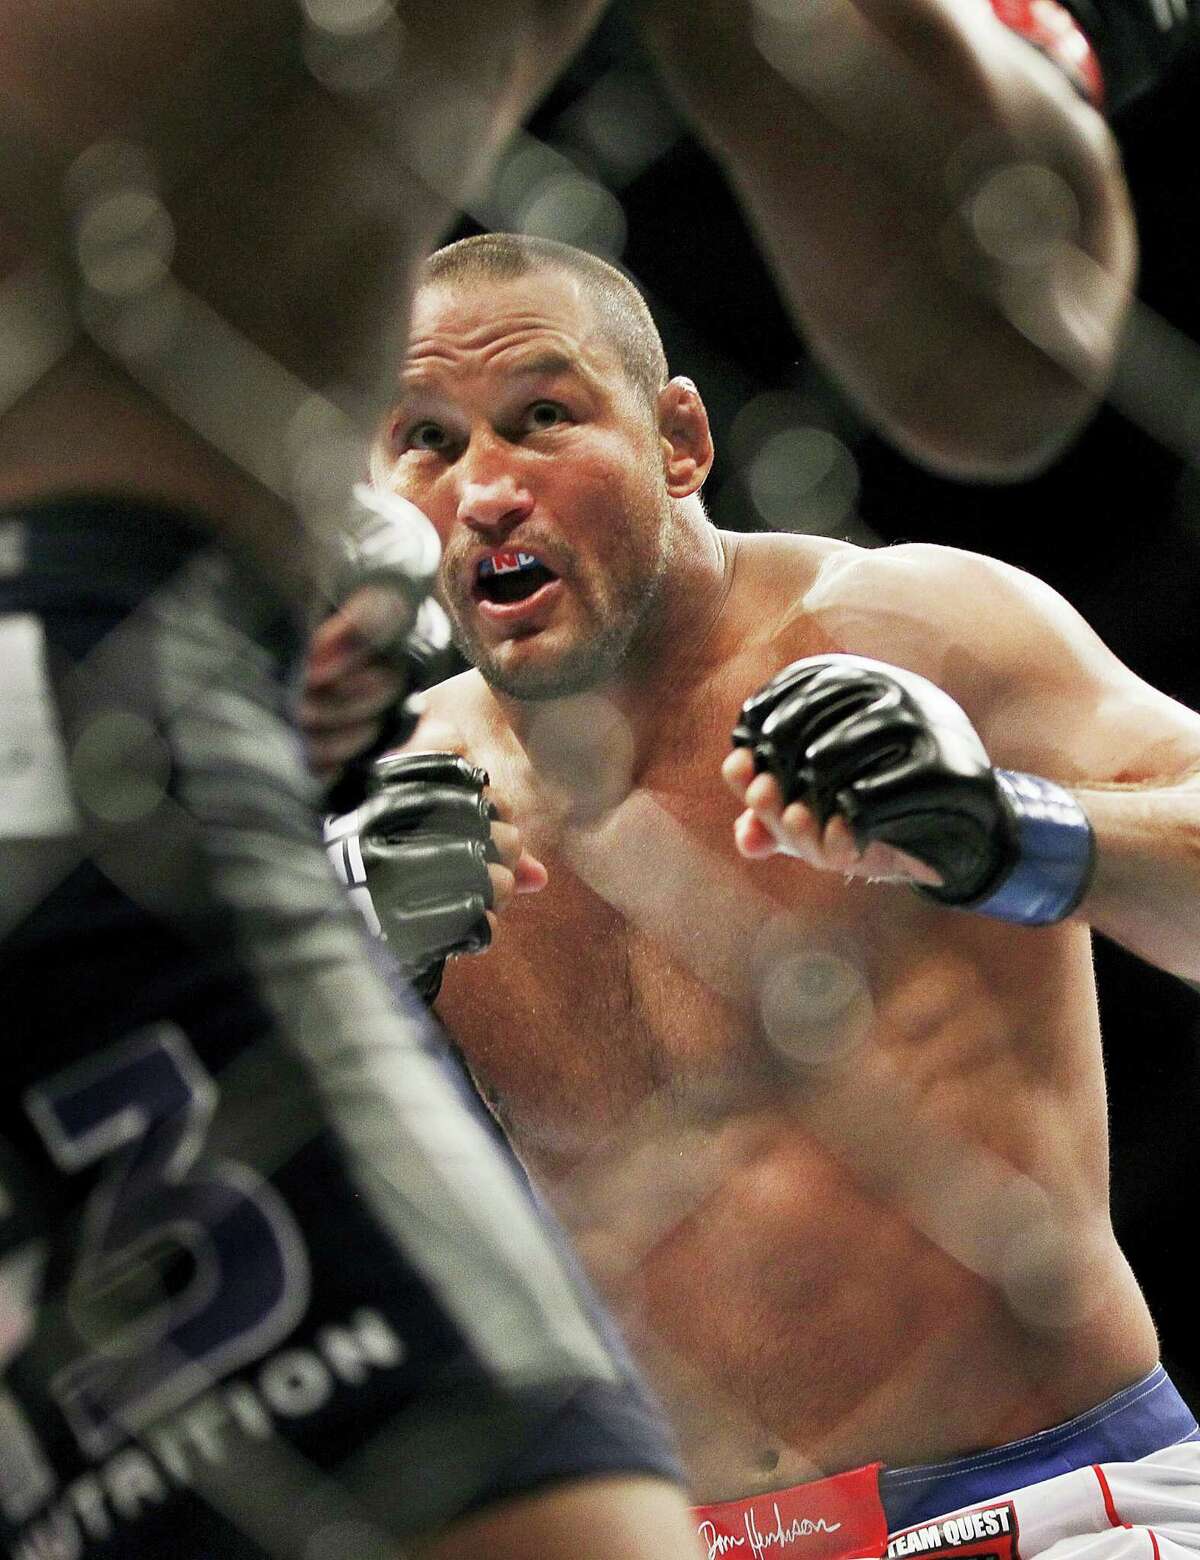 In this June 15, 2013 photo, Dan Henderson moves in on Rashad Evans during a UFC 161 mixed martial arts bout in Winnipeg, Manitoba. Henderson failed to cap his 19-year career by beating middleweight champion Michael Bisping in the main event of UFC 204 on Oct. 9, 2016 in Manchester, England.